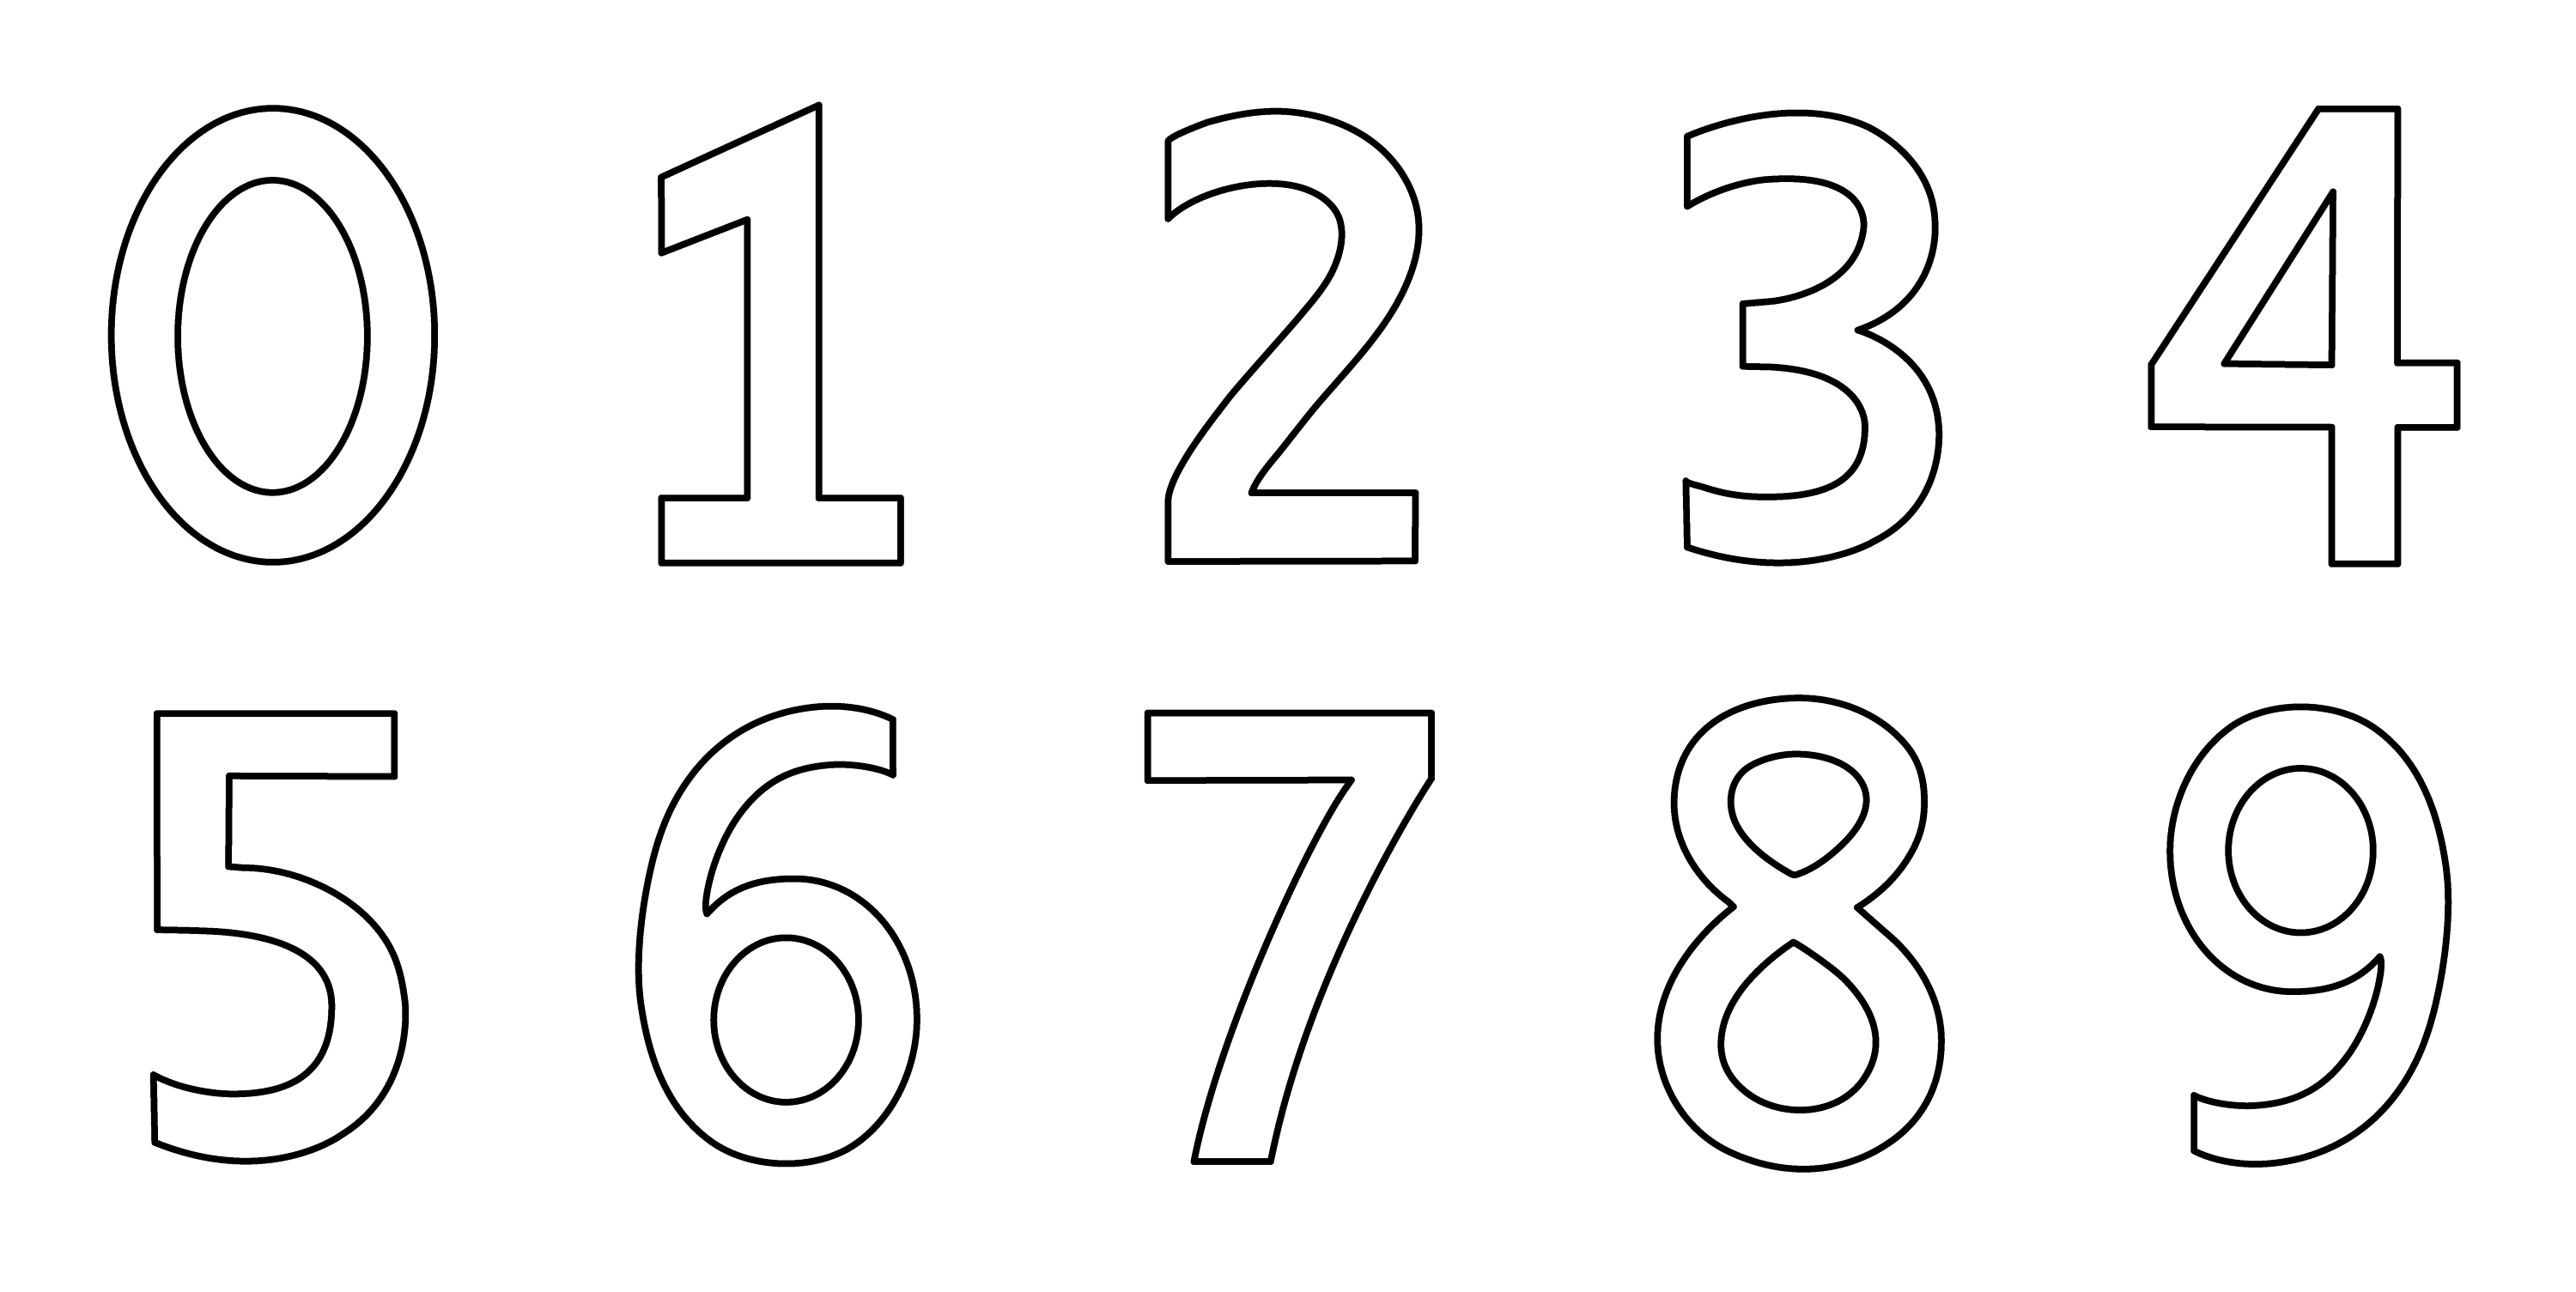 numbers clipart black and white - photo #27